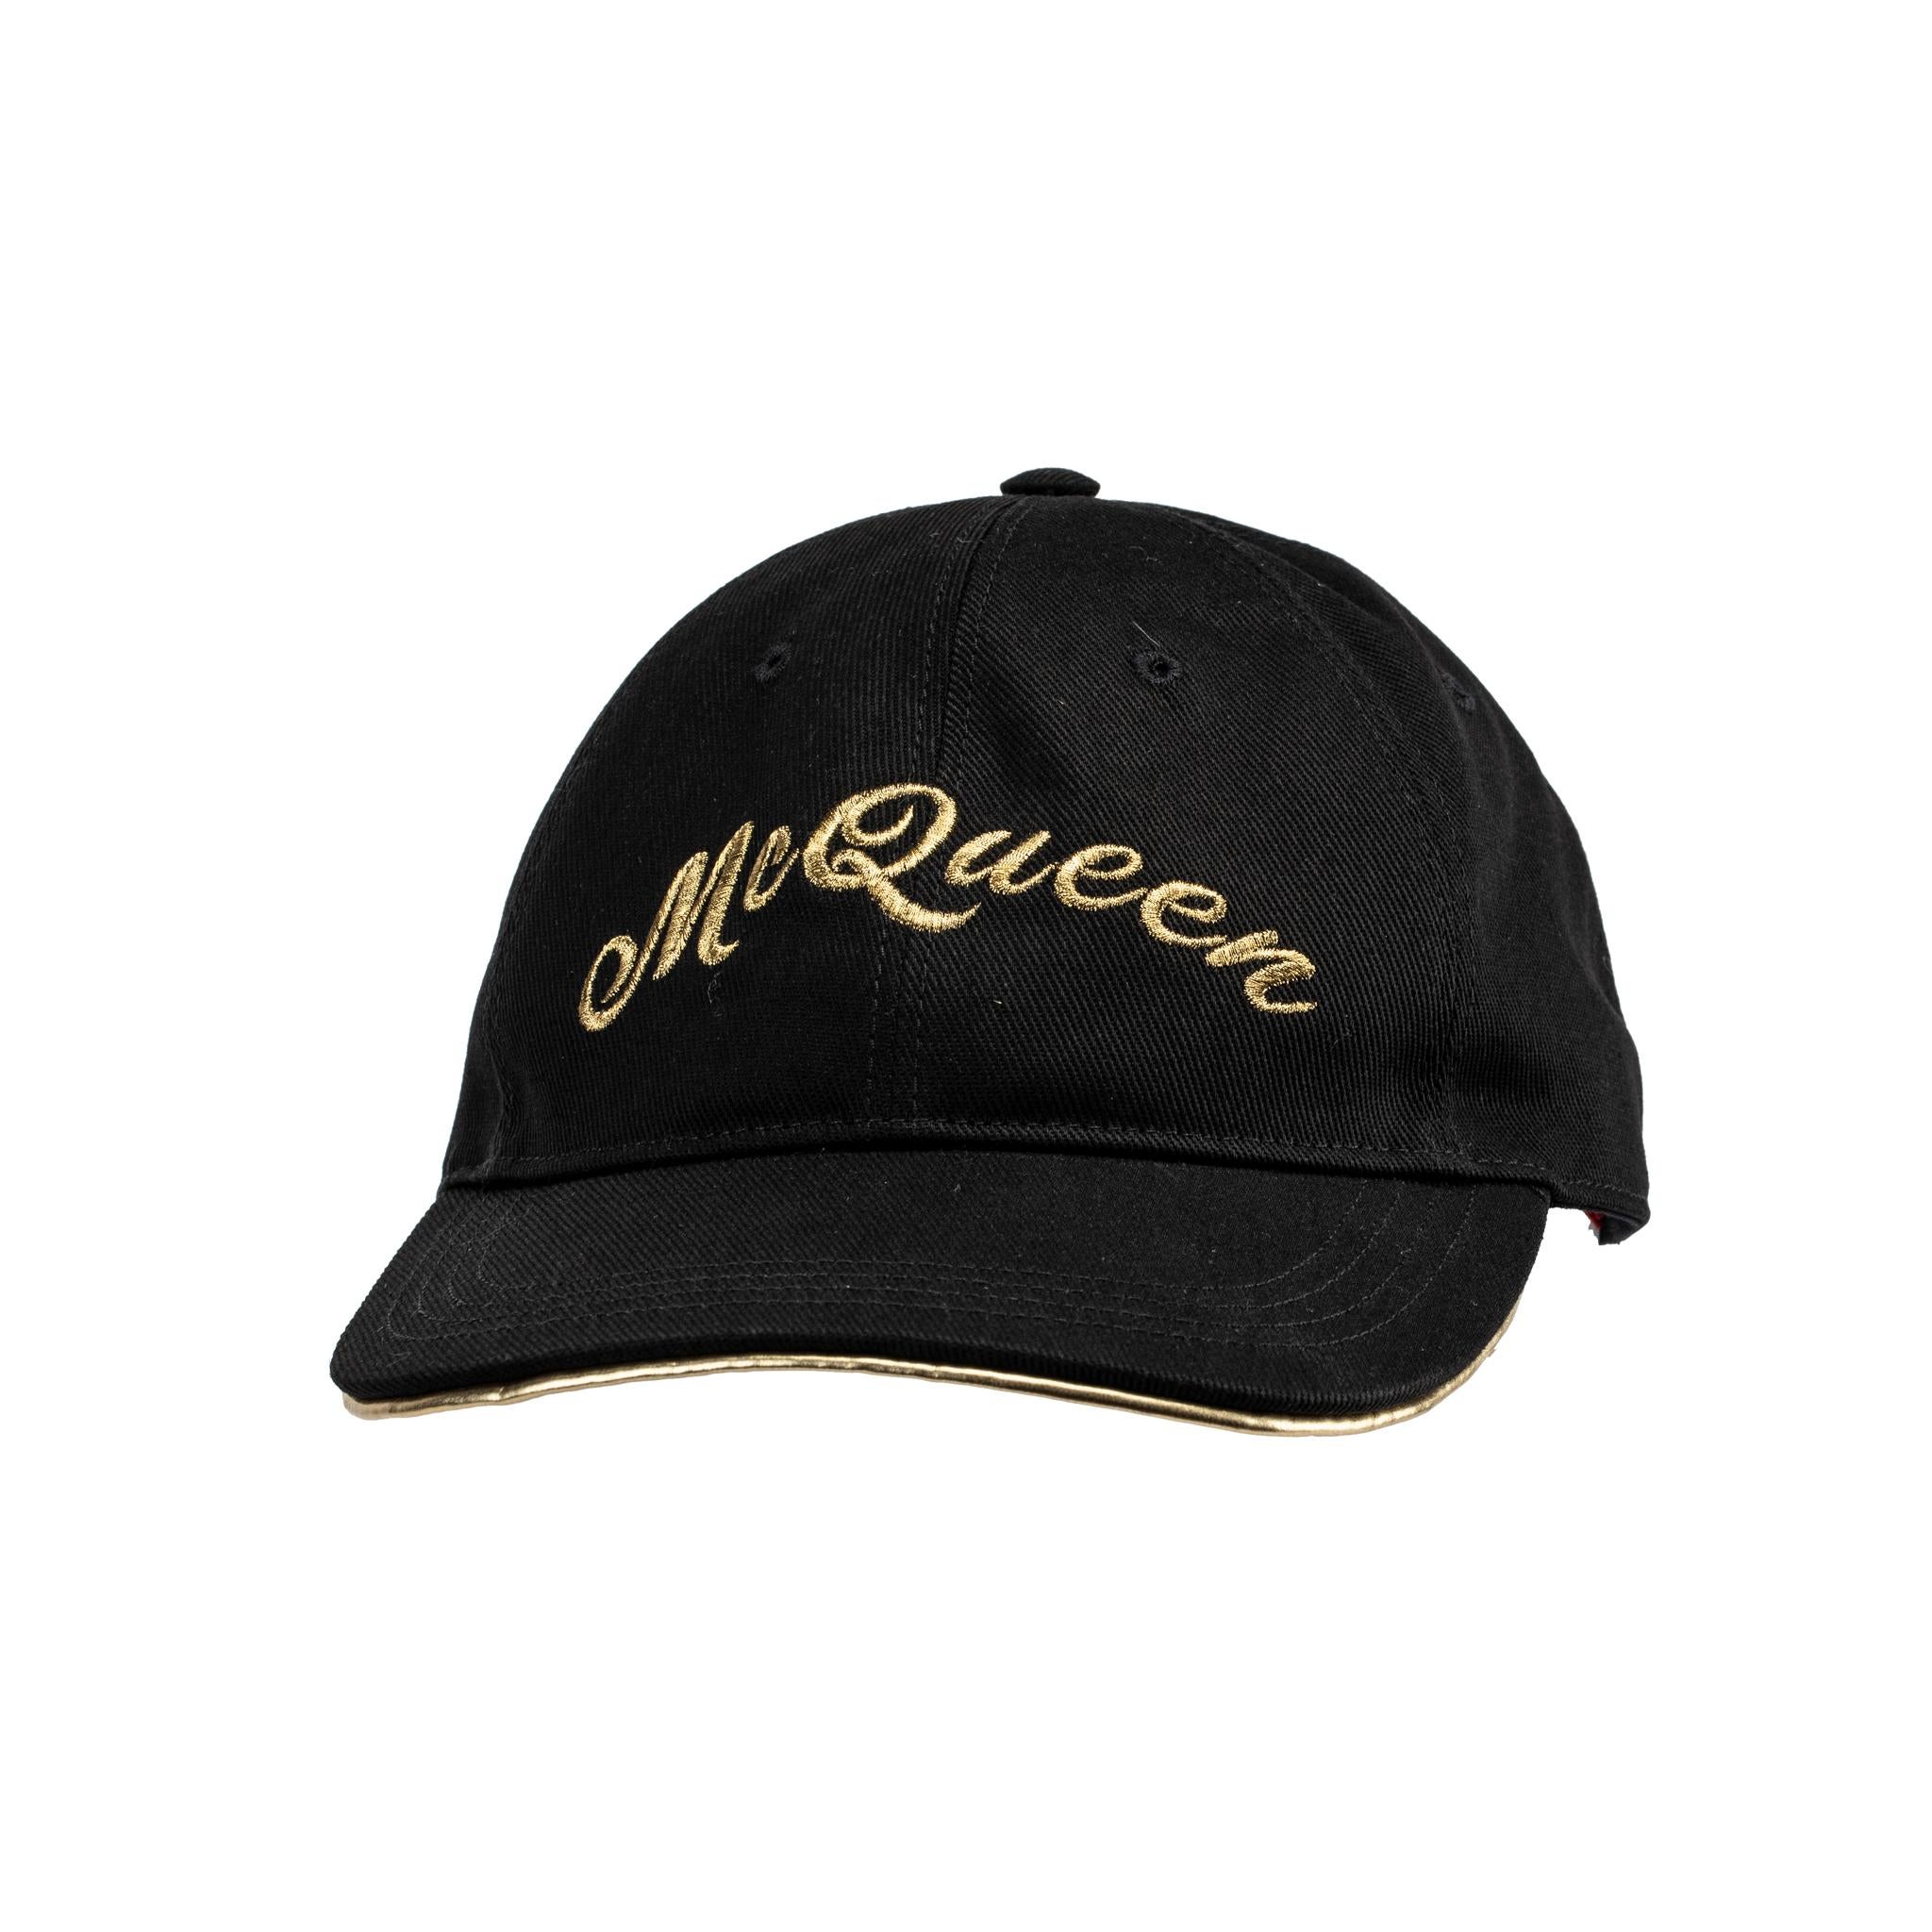 Alexander McQueen Embroidered Cap Black & Gold In New Condition For Sale In DOUBLE BAY, NSW